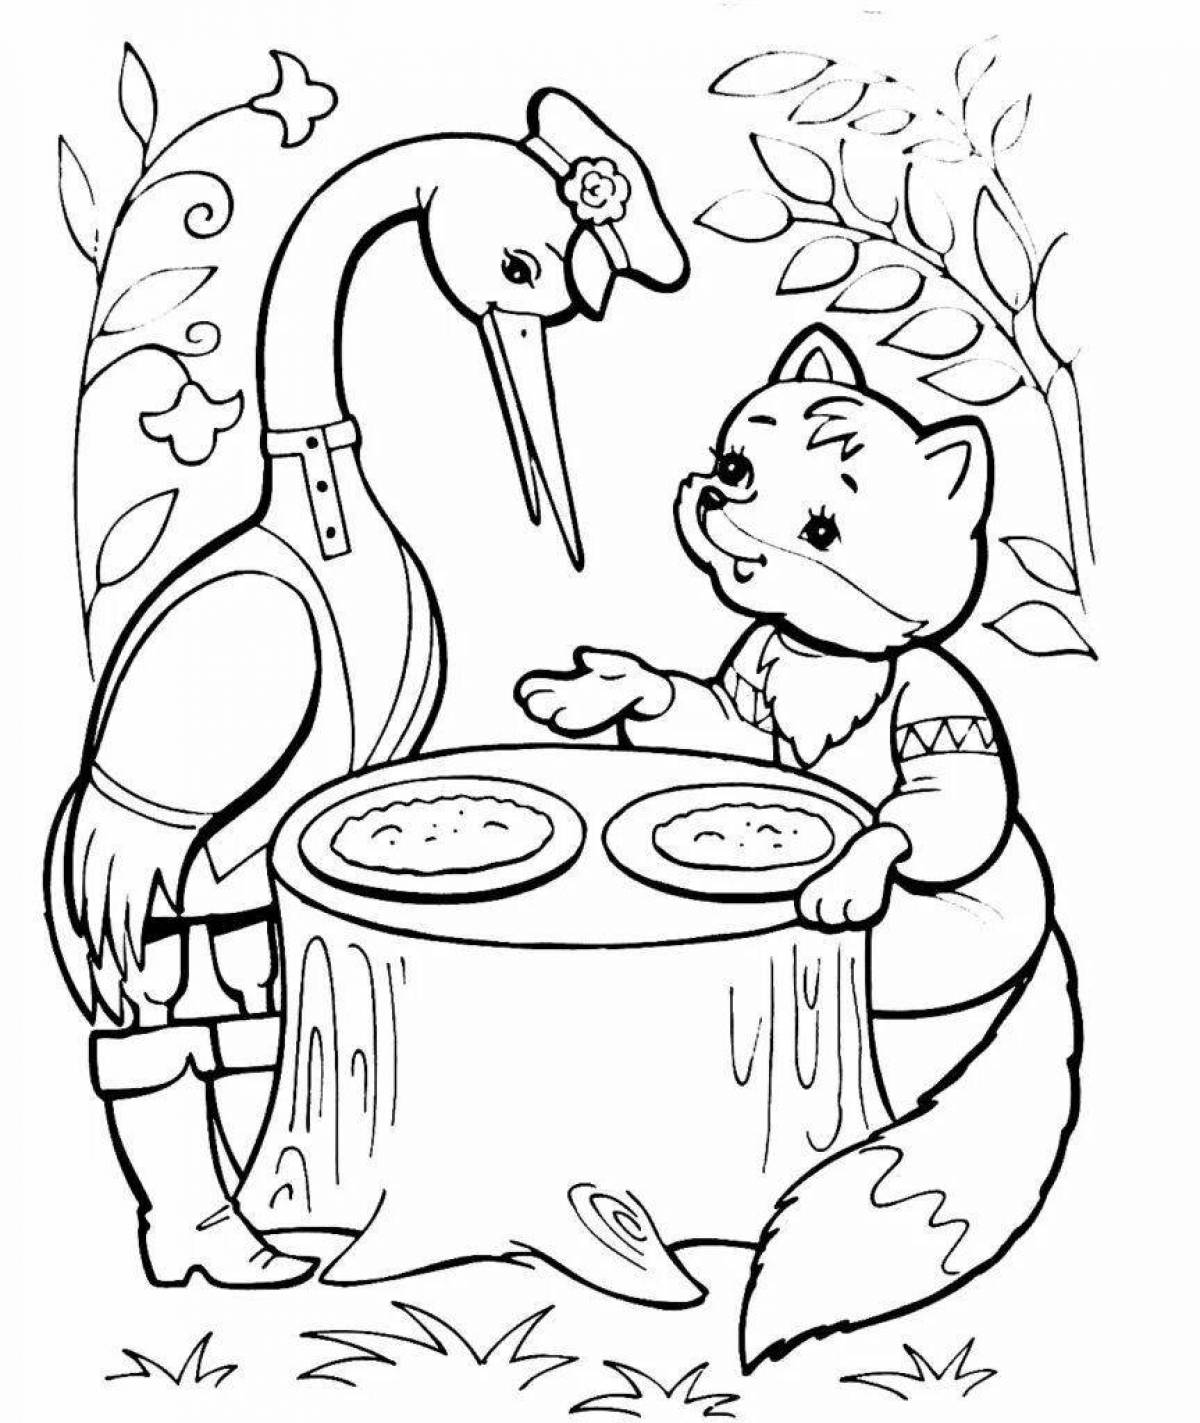 Inviting coloring book visiting a fairy tale